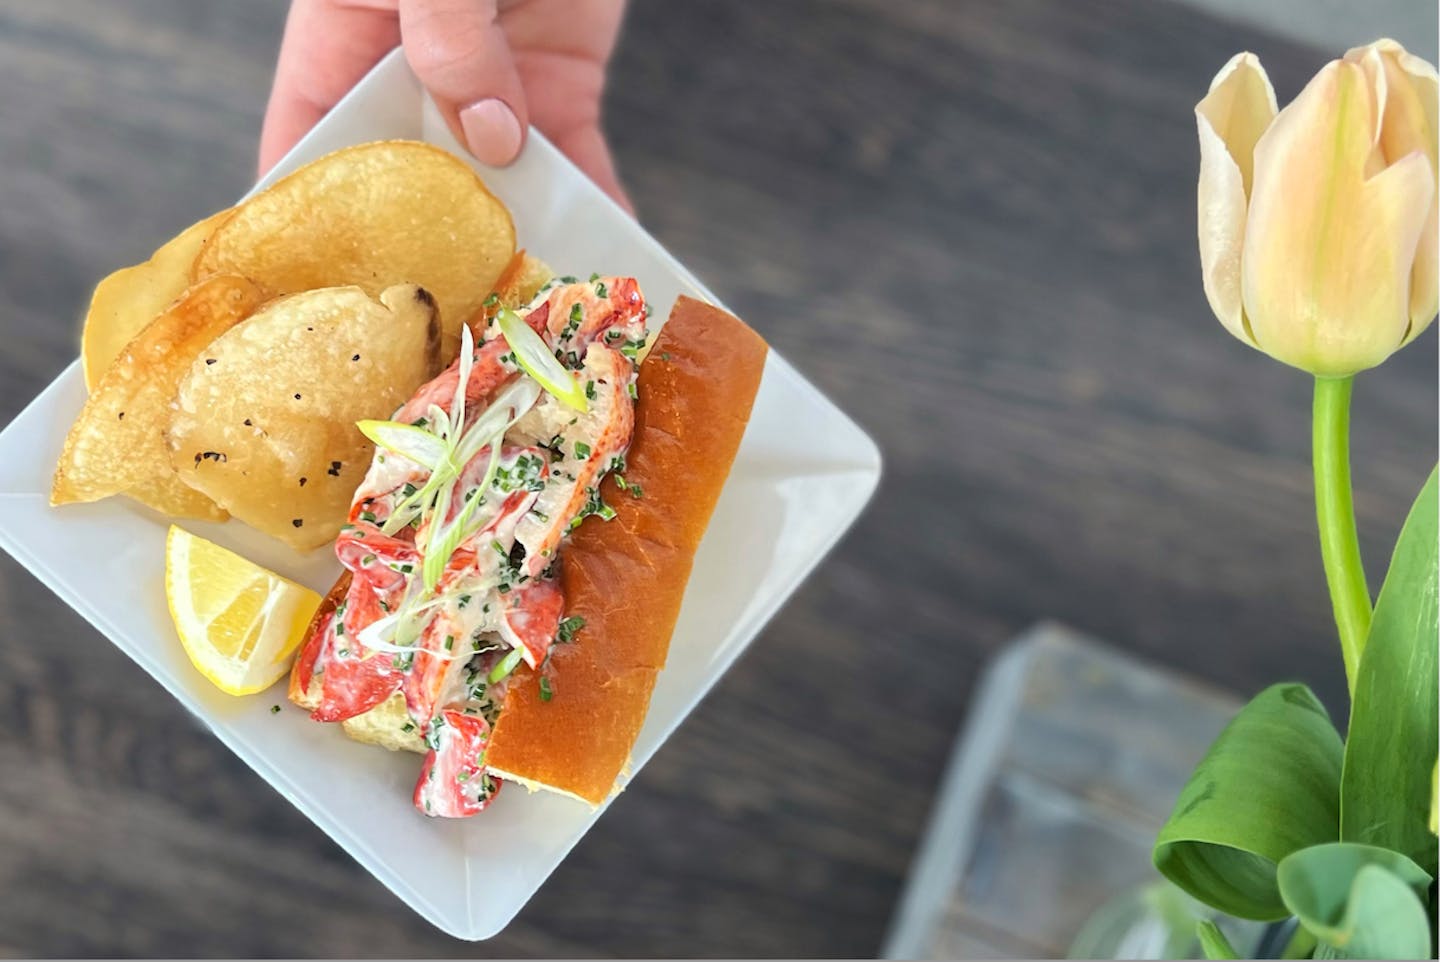 Hand holding a white plate with a lobster roll, chips, and lemon wedge. There is a soft yellow tulip on the far right side of the image.